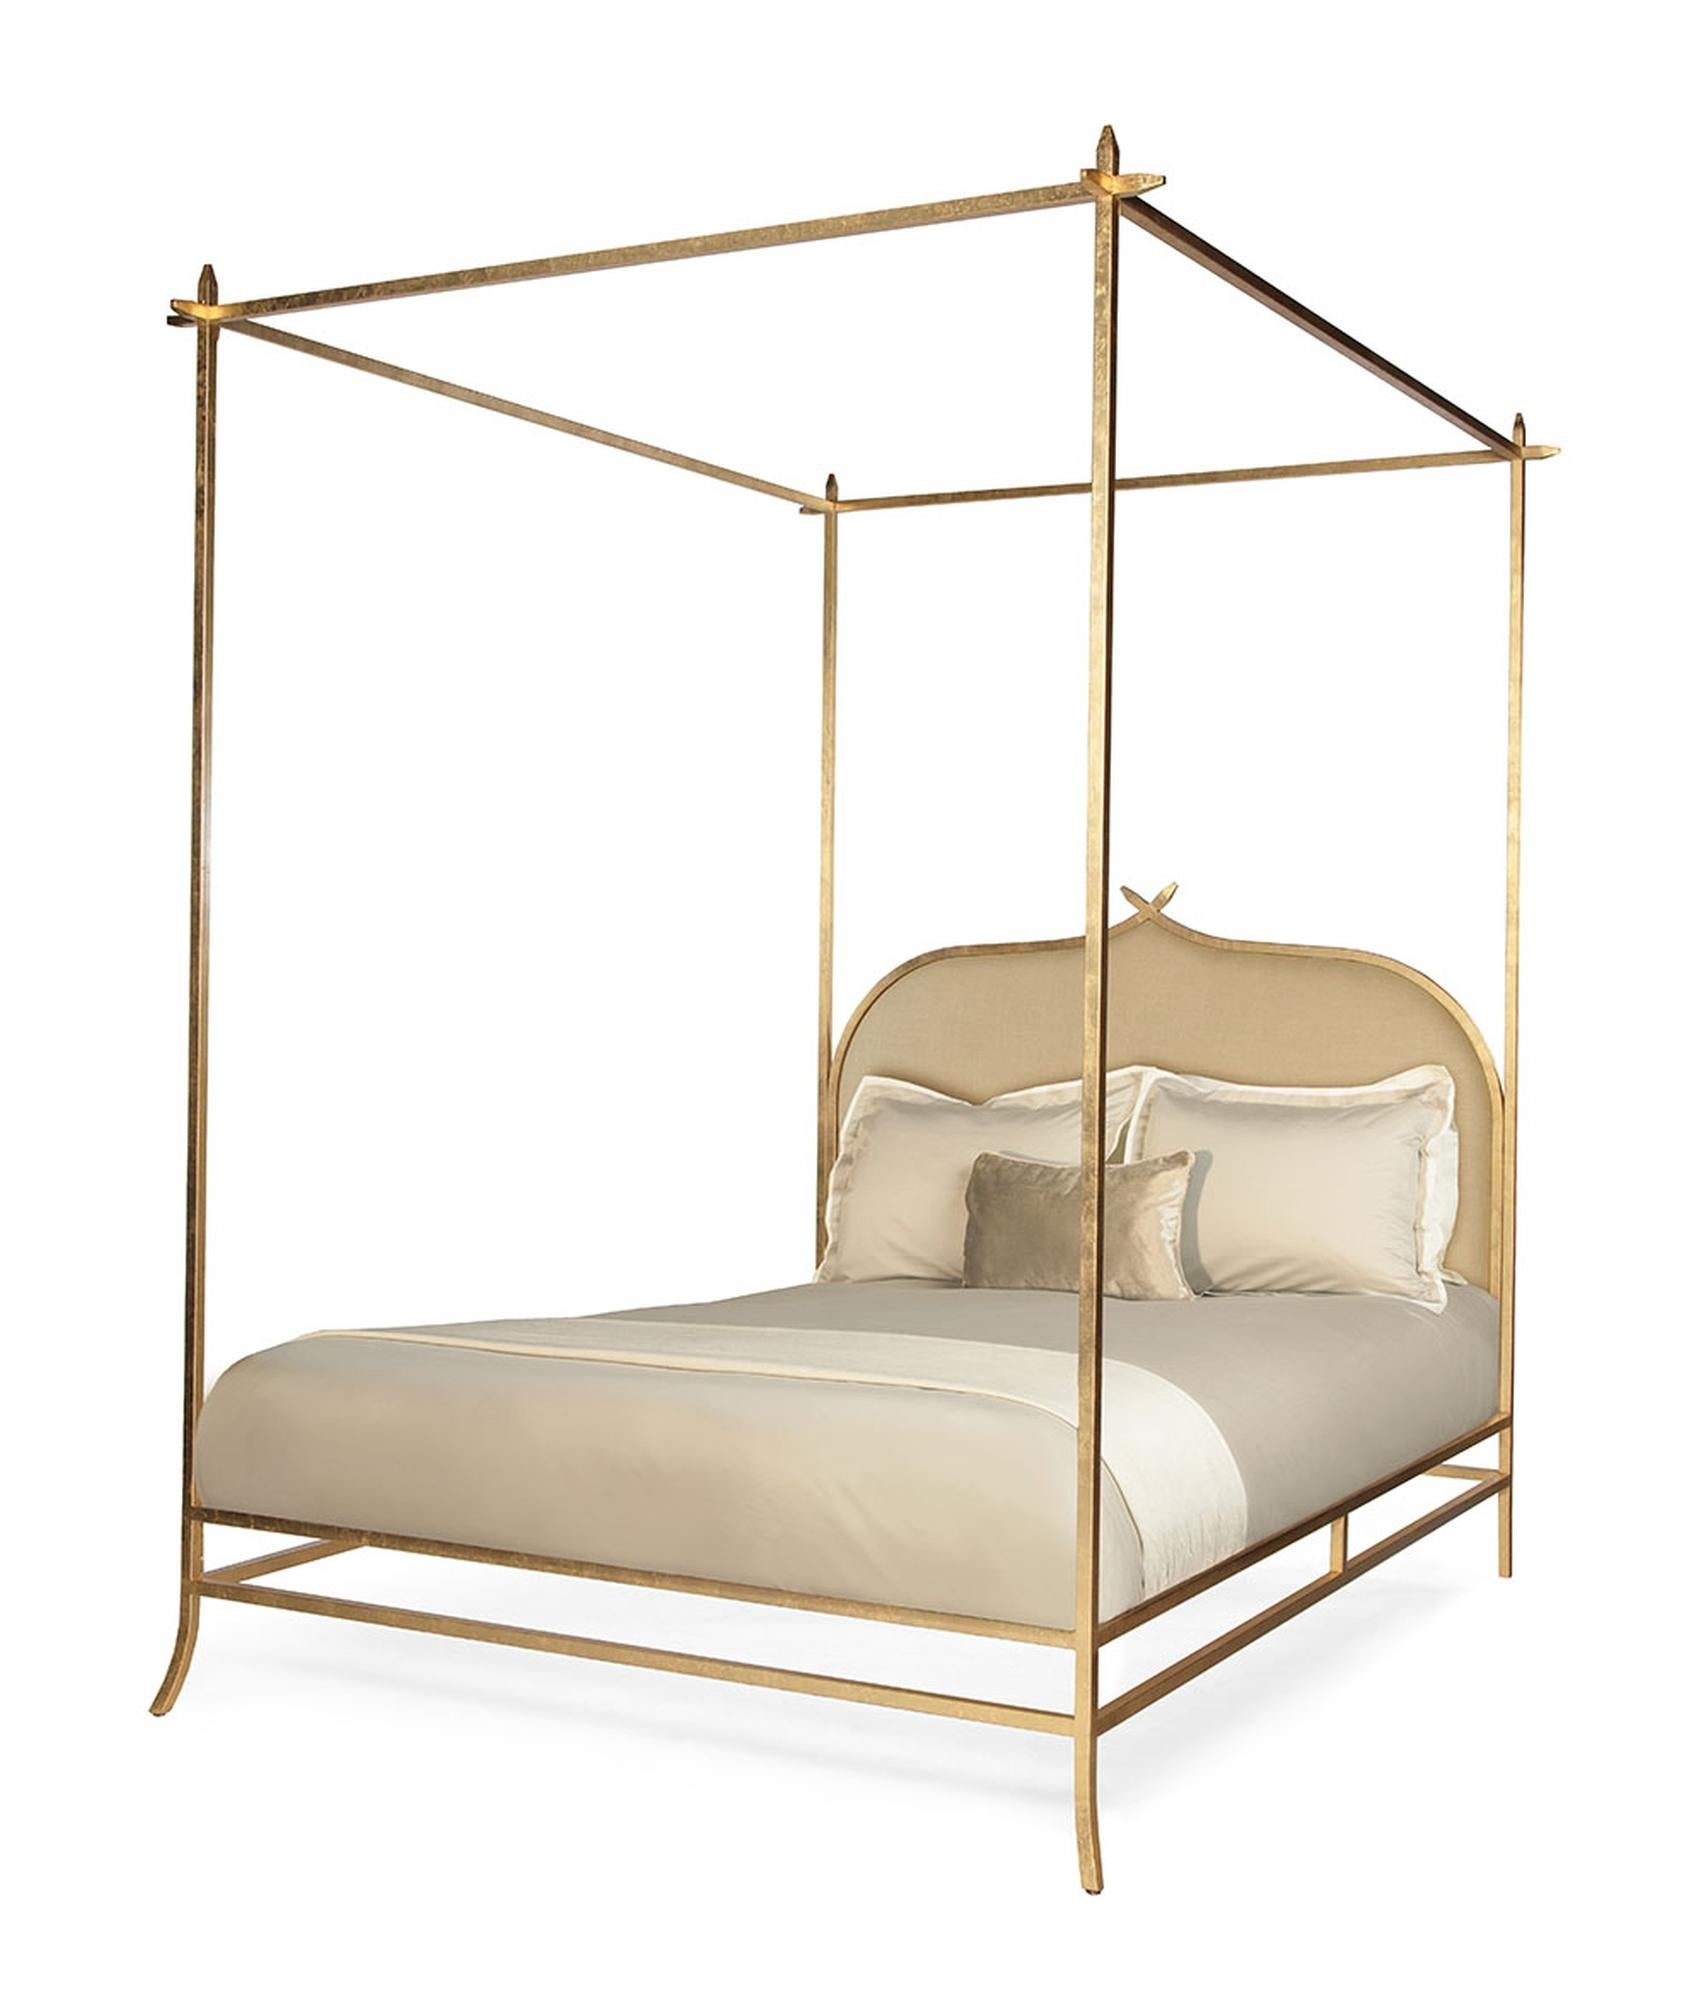 The epitome of true sophistication and elegance, the hand-gilded Casablanca poster bed effortlessly assumes centre stage with its gorgeous gold-leafed metal design. Distinguished by crisp lines and a linear silhouette, the tightly upholstered linen